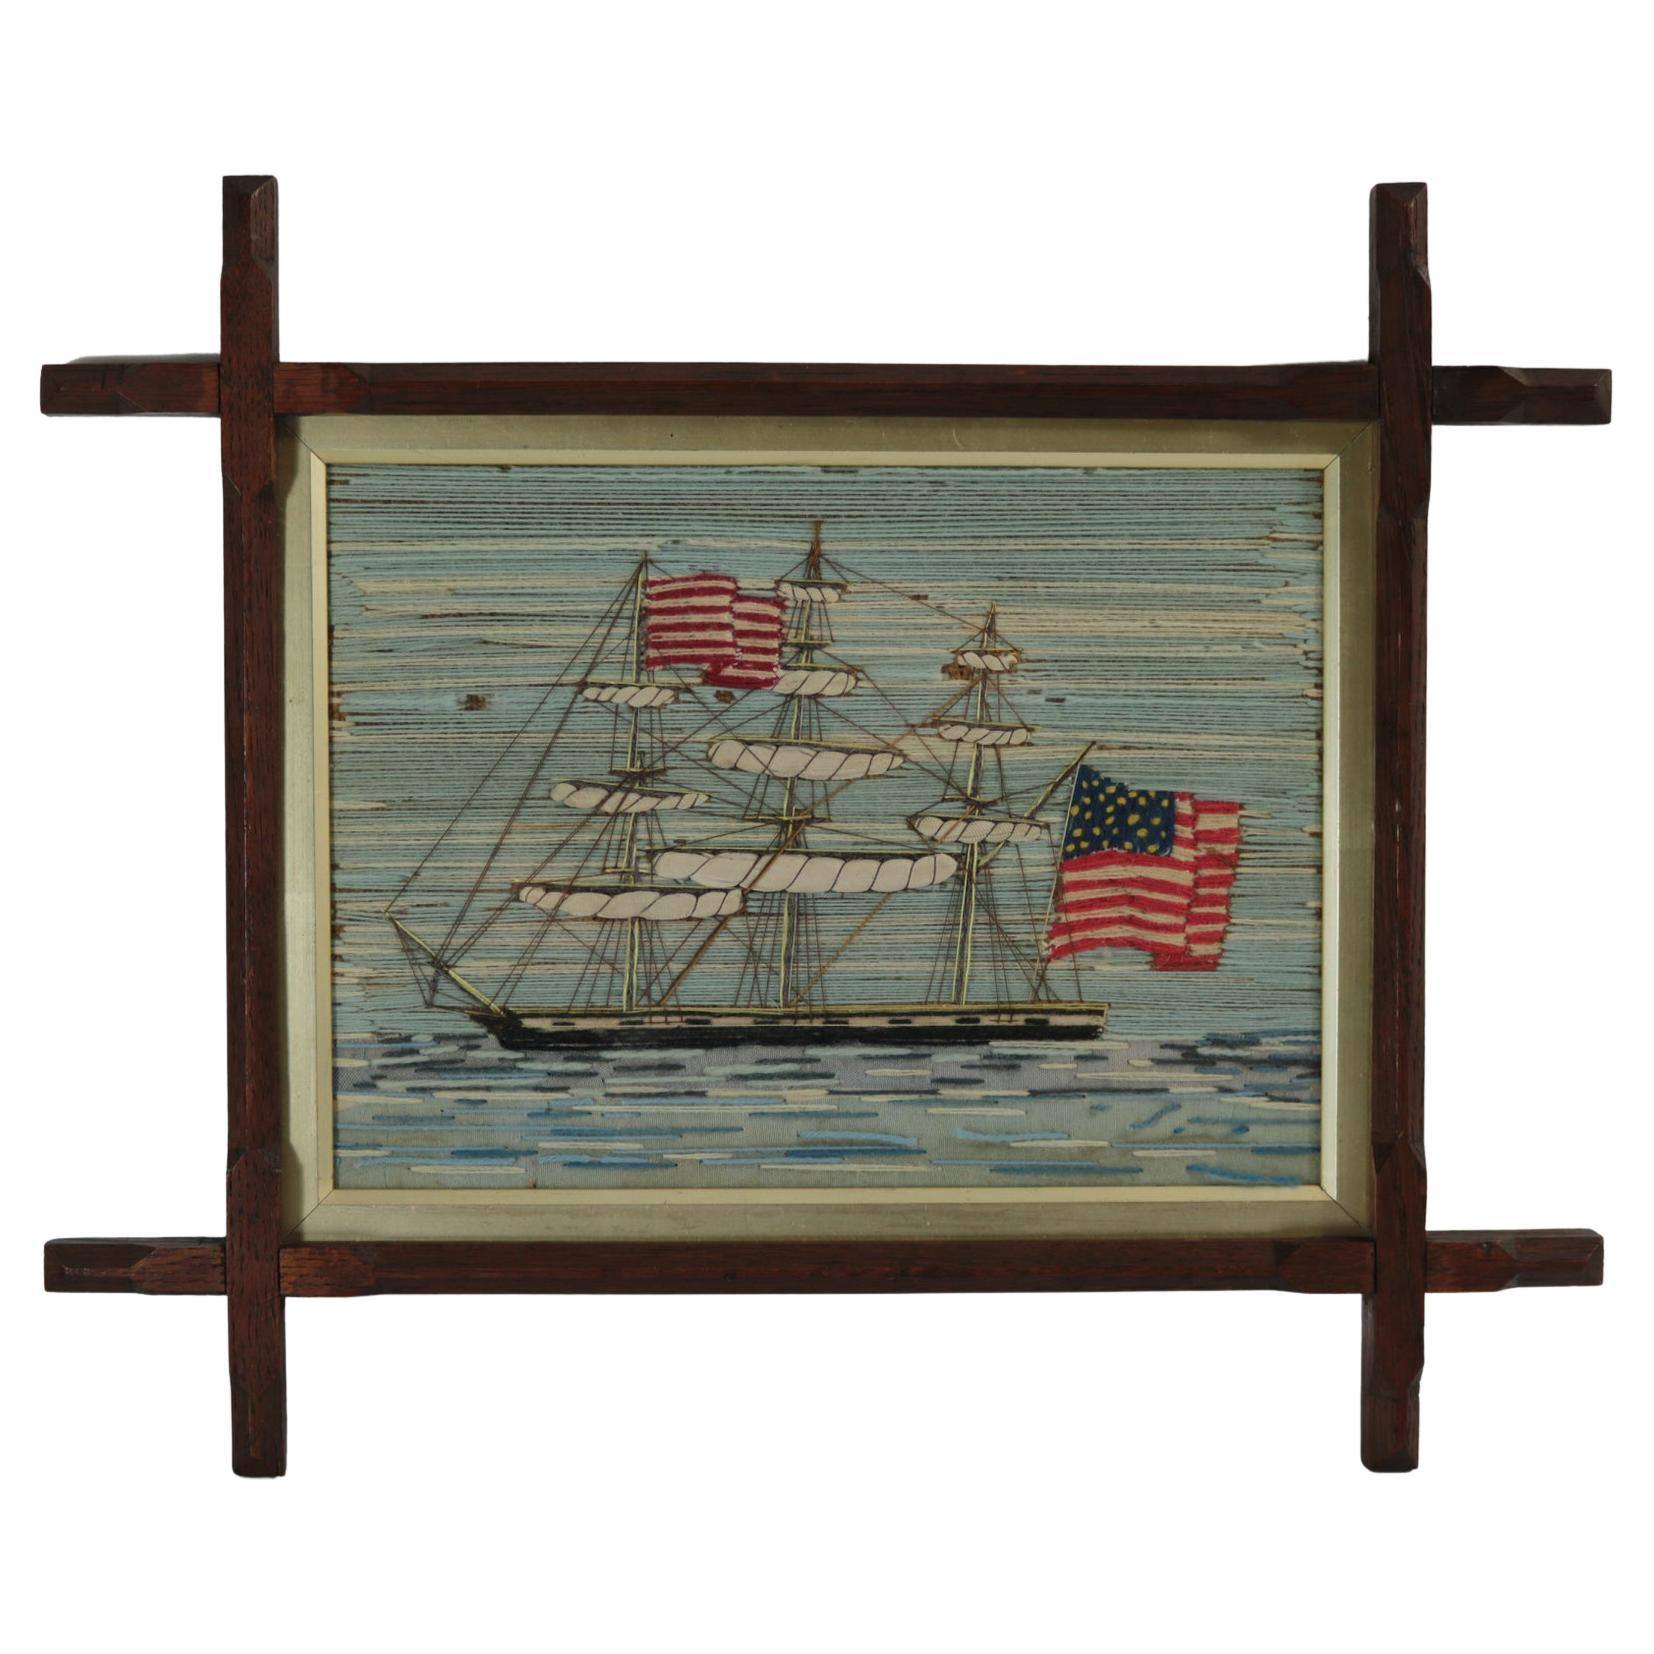 Antique Sailor's Woolwork Embroidery of an American Ship